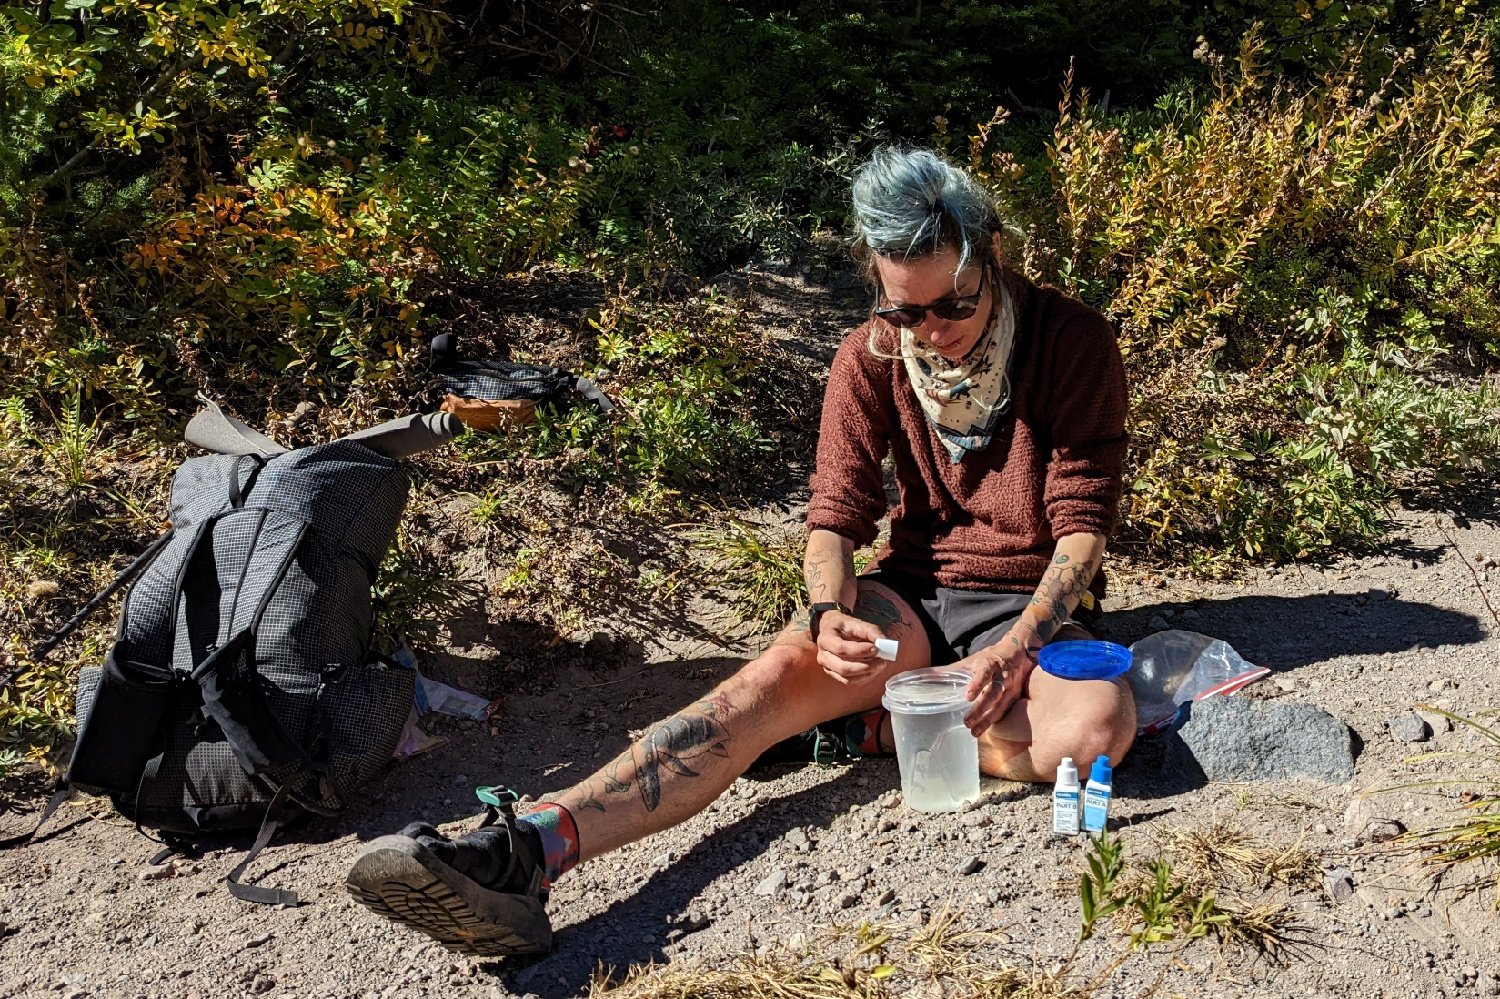 A hiker dropping Aquamira treatment into a water bottle on trail